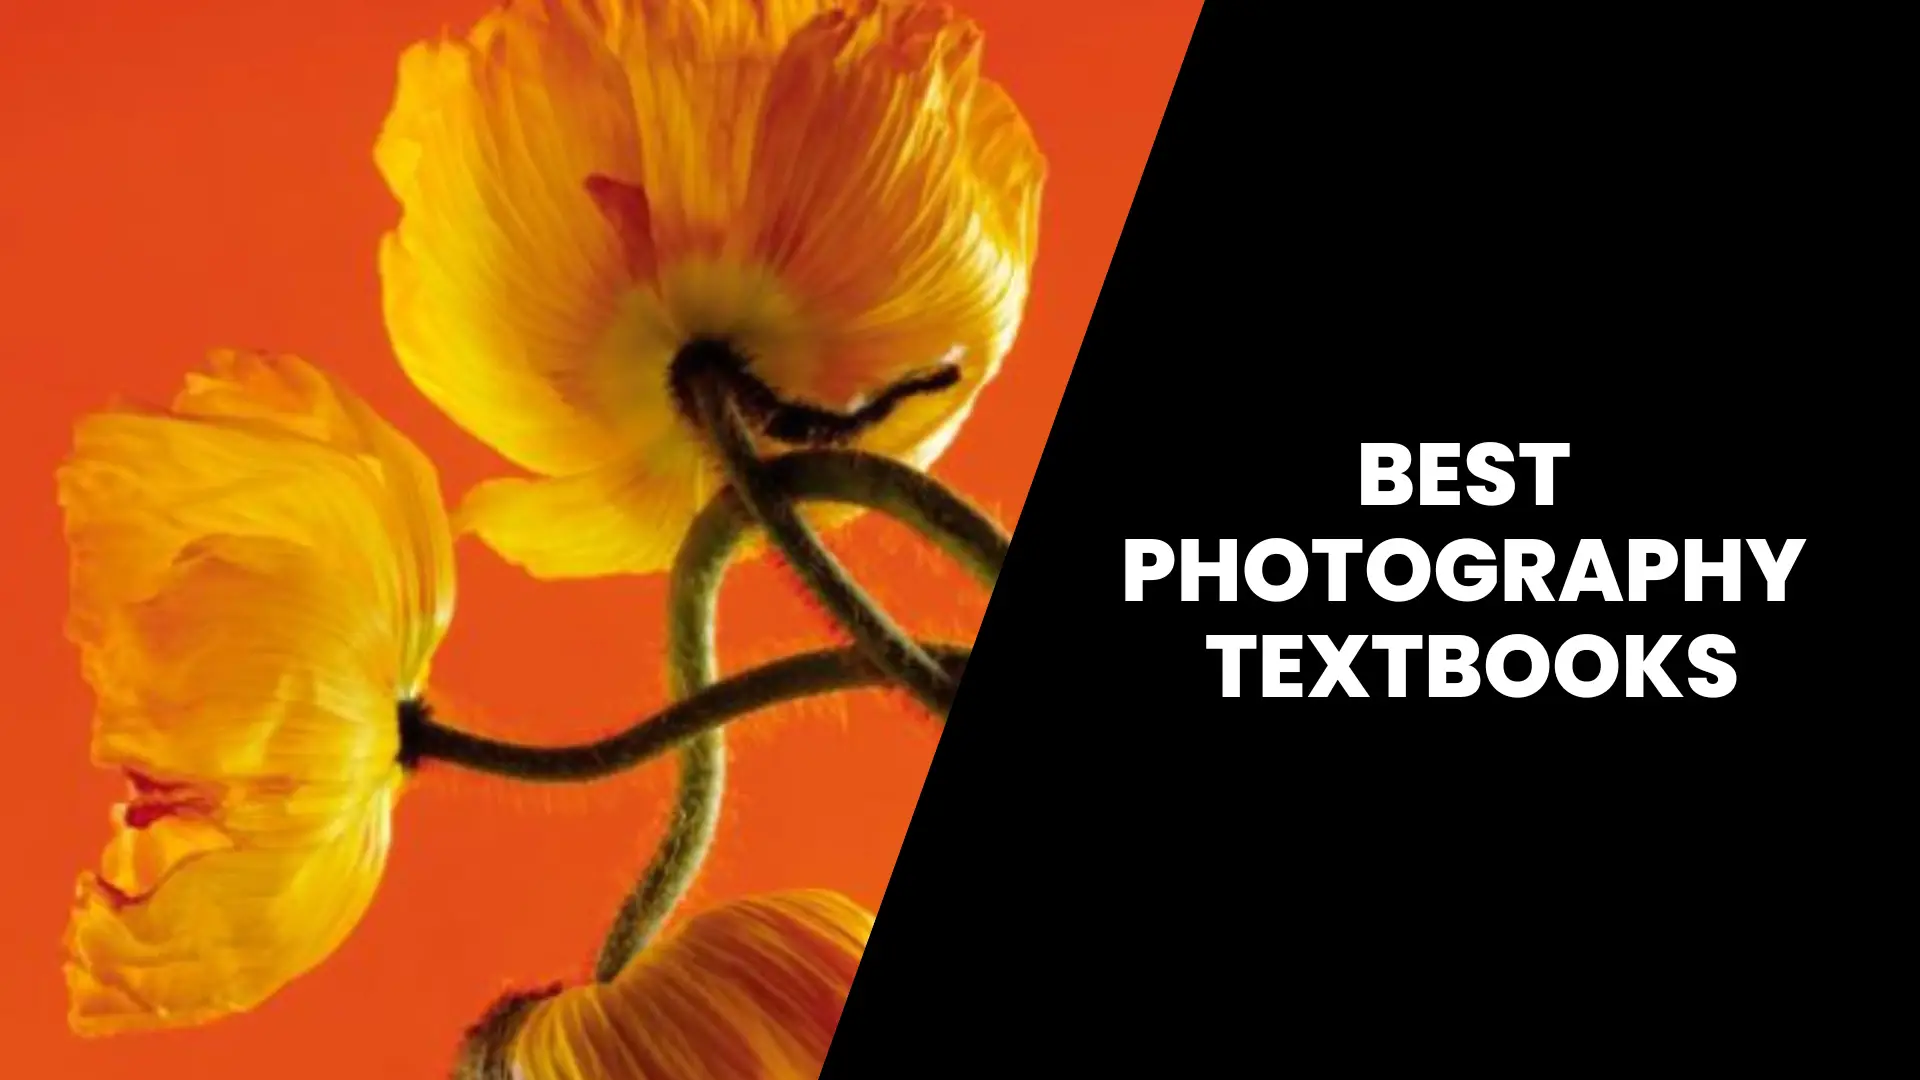 best photography textbooks for college and self education